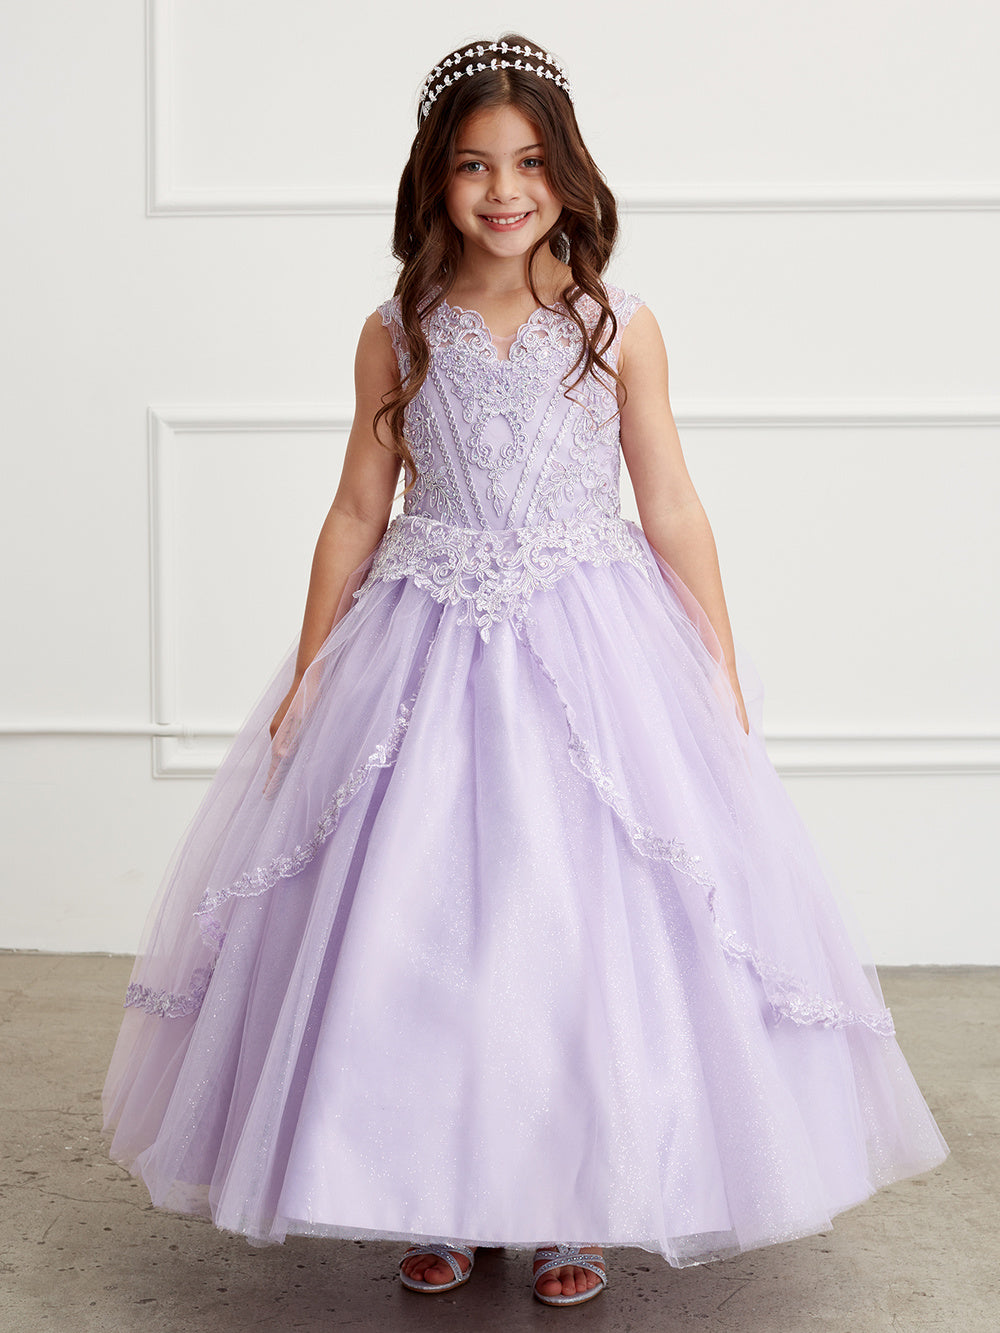 Lilac Girl Dress with Metallic Corded Lace Bodice - AS7028